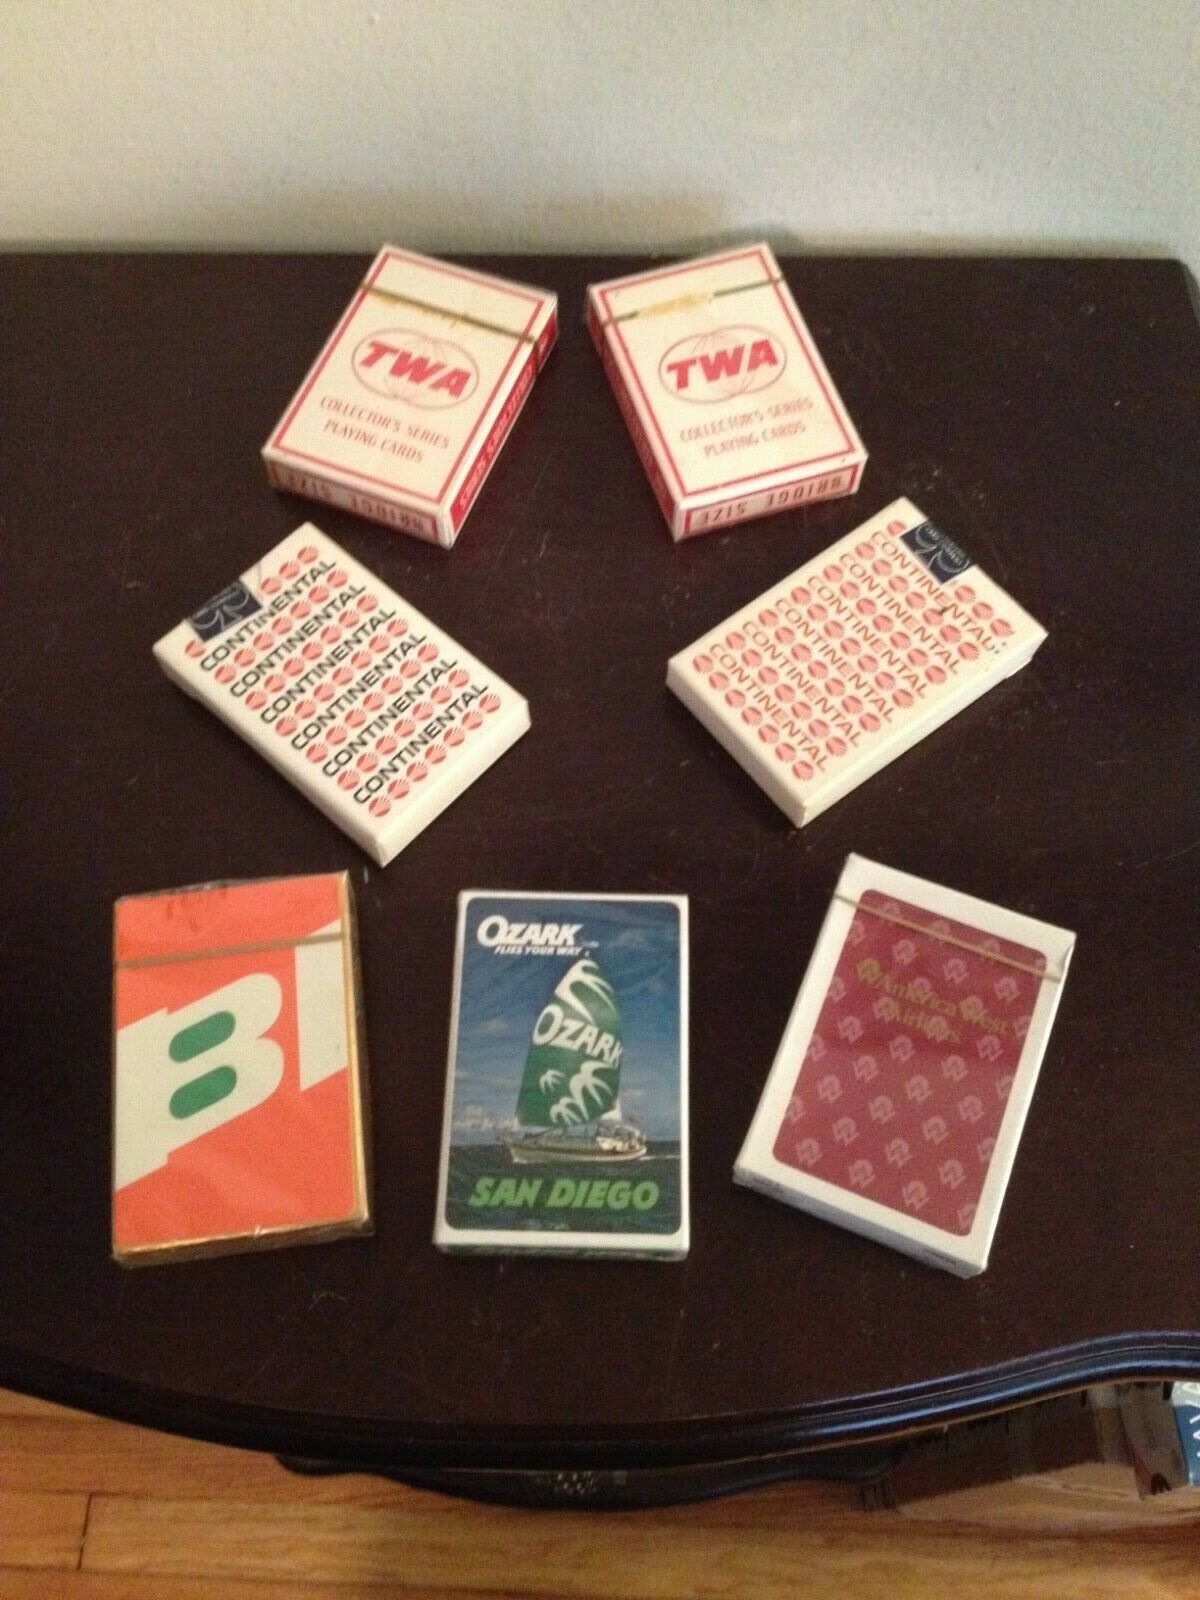 LOT 7 VINTAGE AIRLINES PLAYING CARDS SEALED DECKS TWA BRANIFF CONTINENTAL OZARK 